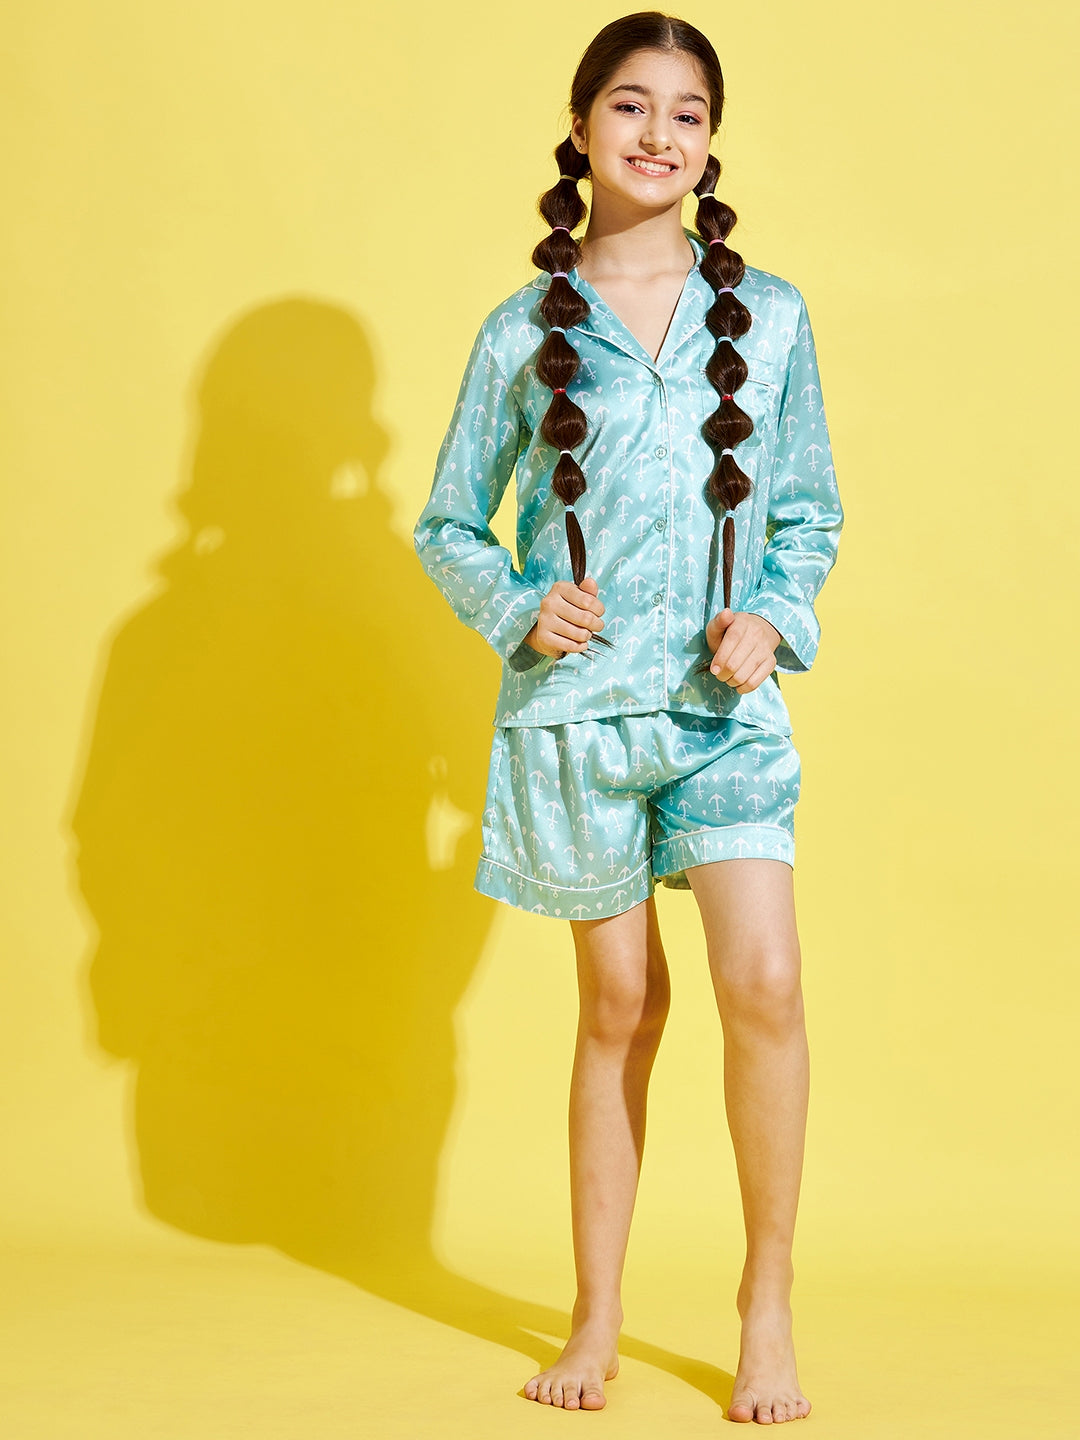 Cherry Jerry Girls Turquoise Blue White Printed Nightsuit